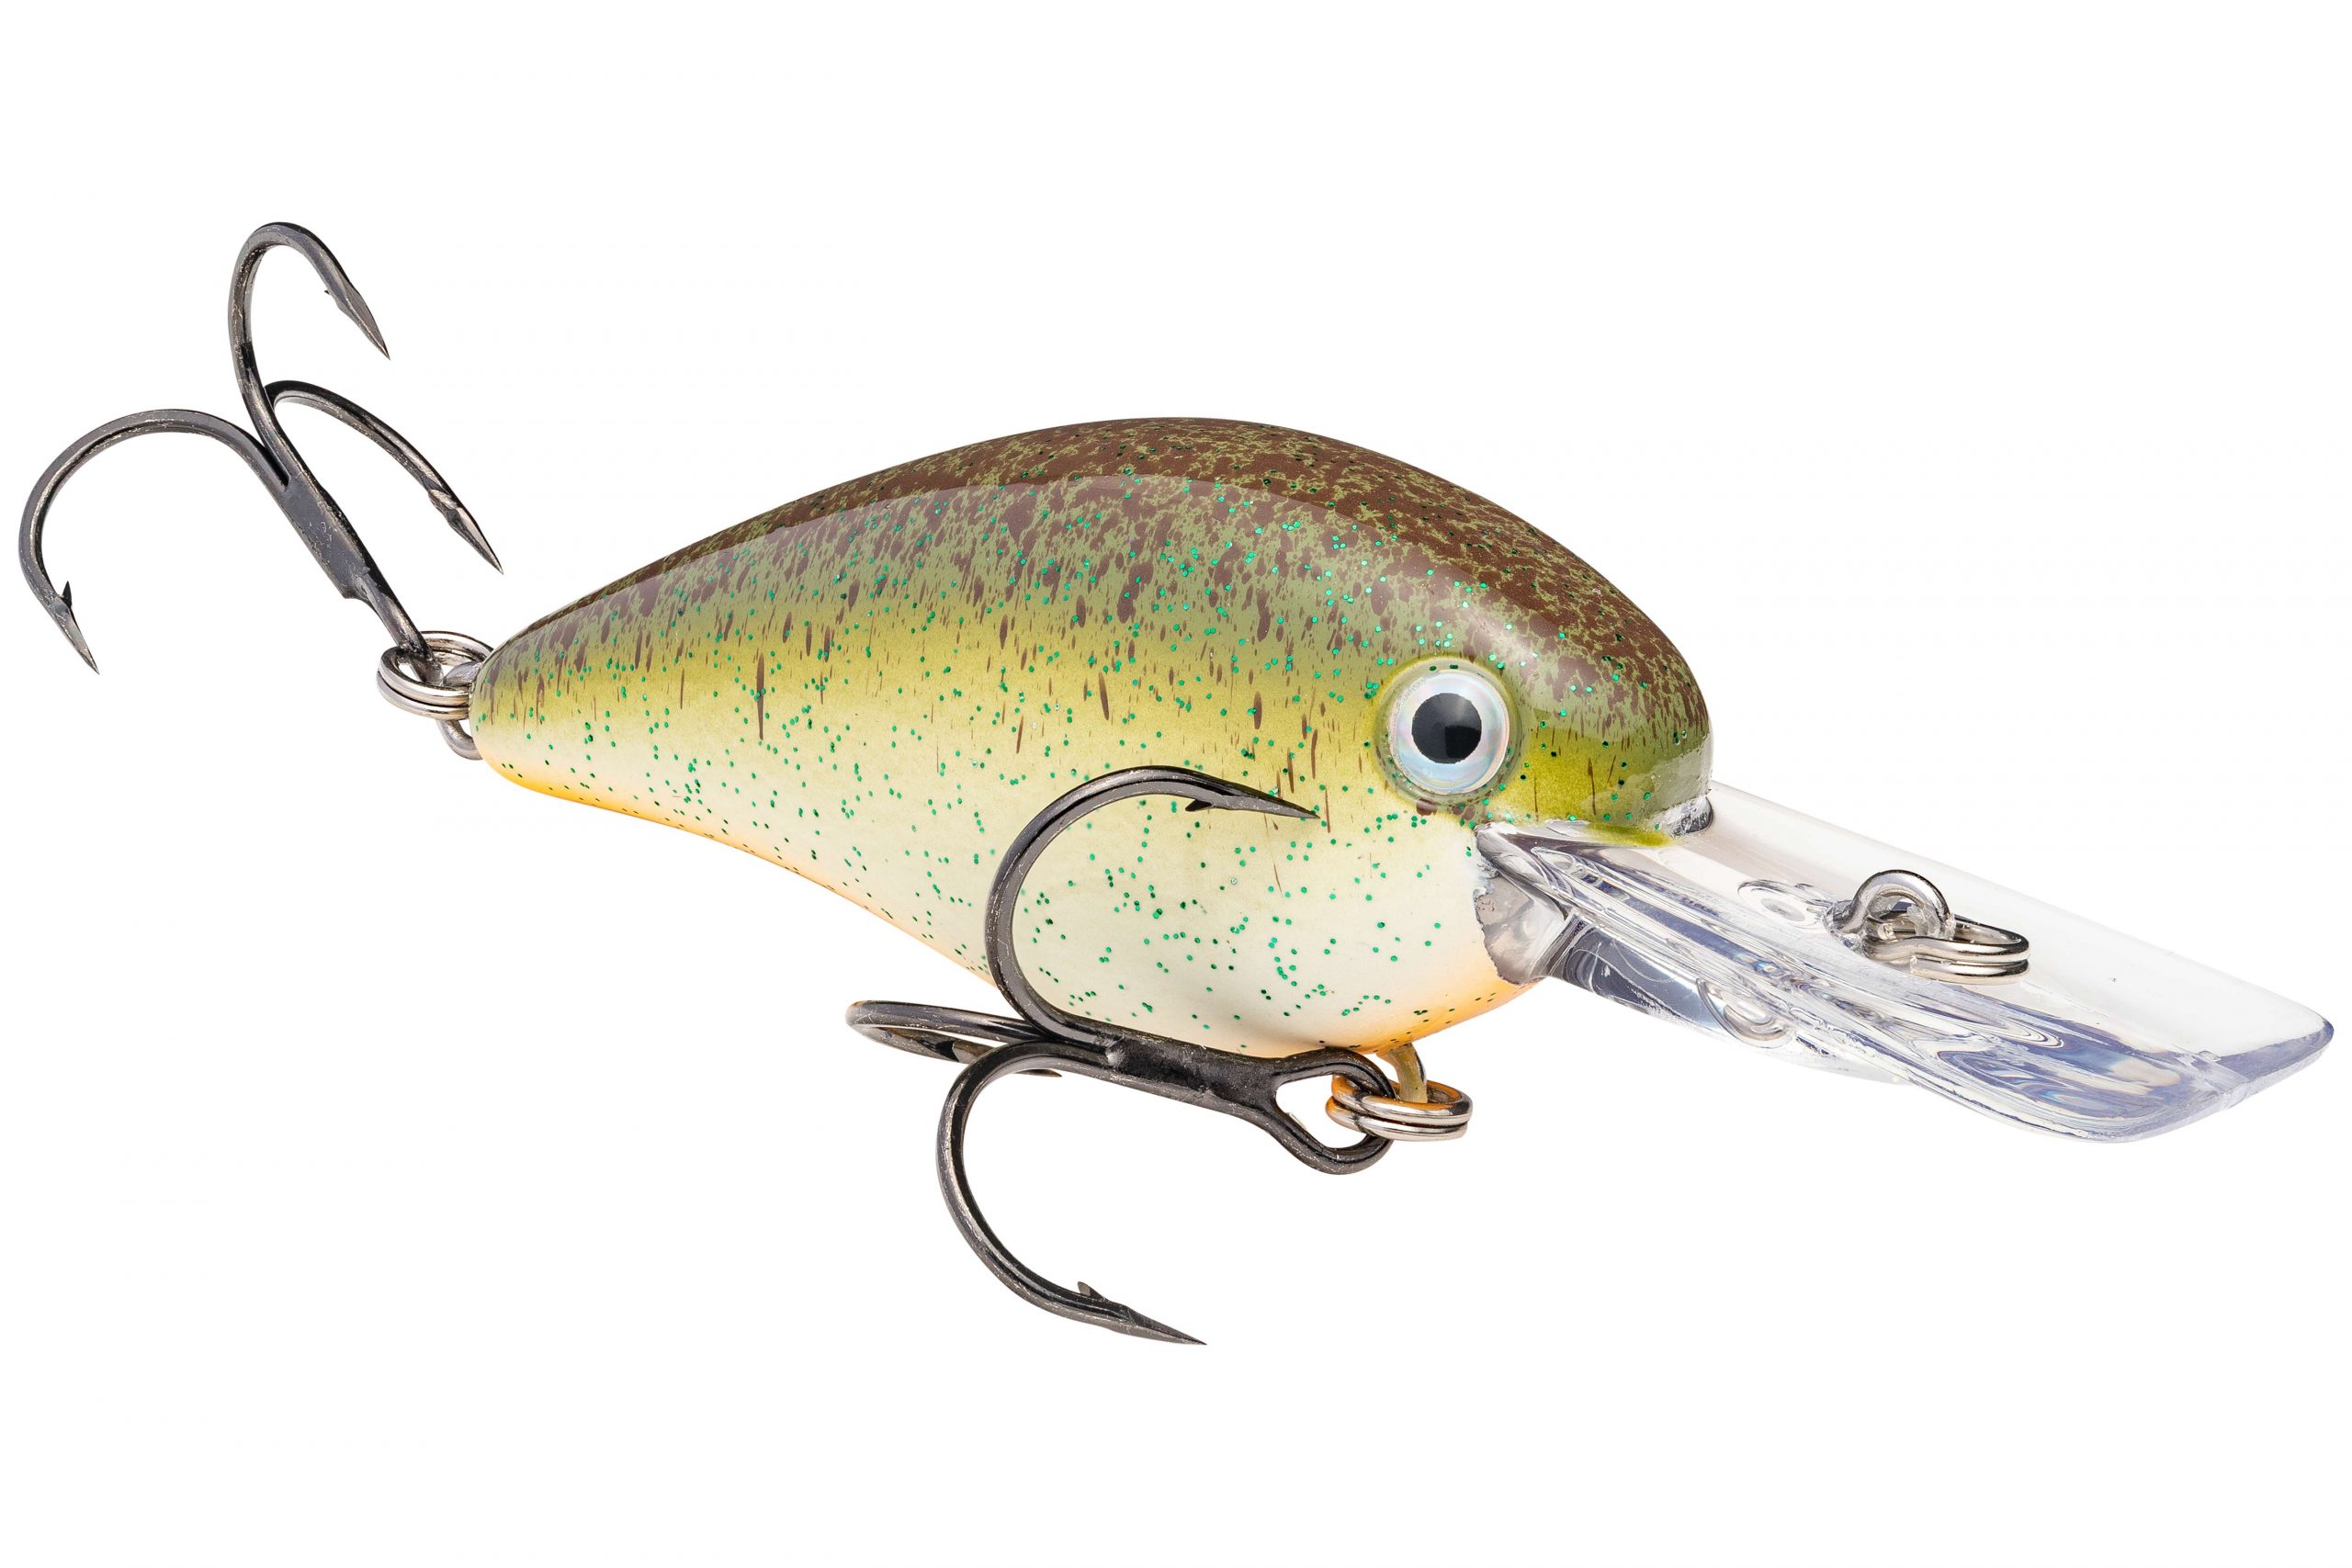 KVD 1.5 Deep	<br>
Strike King<br>
$7.49<br>
For the past several years, the No. 1 selling shallow crankbait in the world has been the KVD 1.5 squarebill. It's popularity was solidified when KVD proved its effectiveness to the world with his 2011 Bassmaster Classic win on the Louisiana Delta. Since then, it has become a tool responsible for countless wins and high finishes from club tournaments to the biggest stages in the sport every single week. The bait has evolved into four other sizes that are also winning options. But Kevin has secretly been working behind the scenes for the past few years on a new 1.5 project. He dreamed of getting his signature crankbait to depths that no other squarebill could reach. After years and many versions of prototypes, Strike King is excited to introduce the all-new KVD 1.5 Deep.
 <br><BR>
âThere is nothing that triggers bites like the hunting action of a 1.5. It has the perfect profile and unique action that gets bites everywhere. If there is a problem with it, its that it has been limited to the shallower ranges of bass habitat. But that is no longer the case,â explains four-time Bassmaster Classic Champion Kevin VanDam. âWeâve worked hard on getting the 1.5 Deep to maintain the perfect action yet dive to 10 feet. It will be a total game changer. Weâve basically extended the range and seasonality of one of the best baits ever built,â KVD added.
<br><br>
The new KVD 1.5 Deep is available in 25 of Kevinâs favorite fish-catching colors and will be available at better fishing tackle retailers everywhere 
